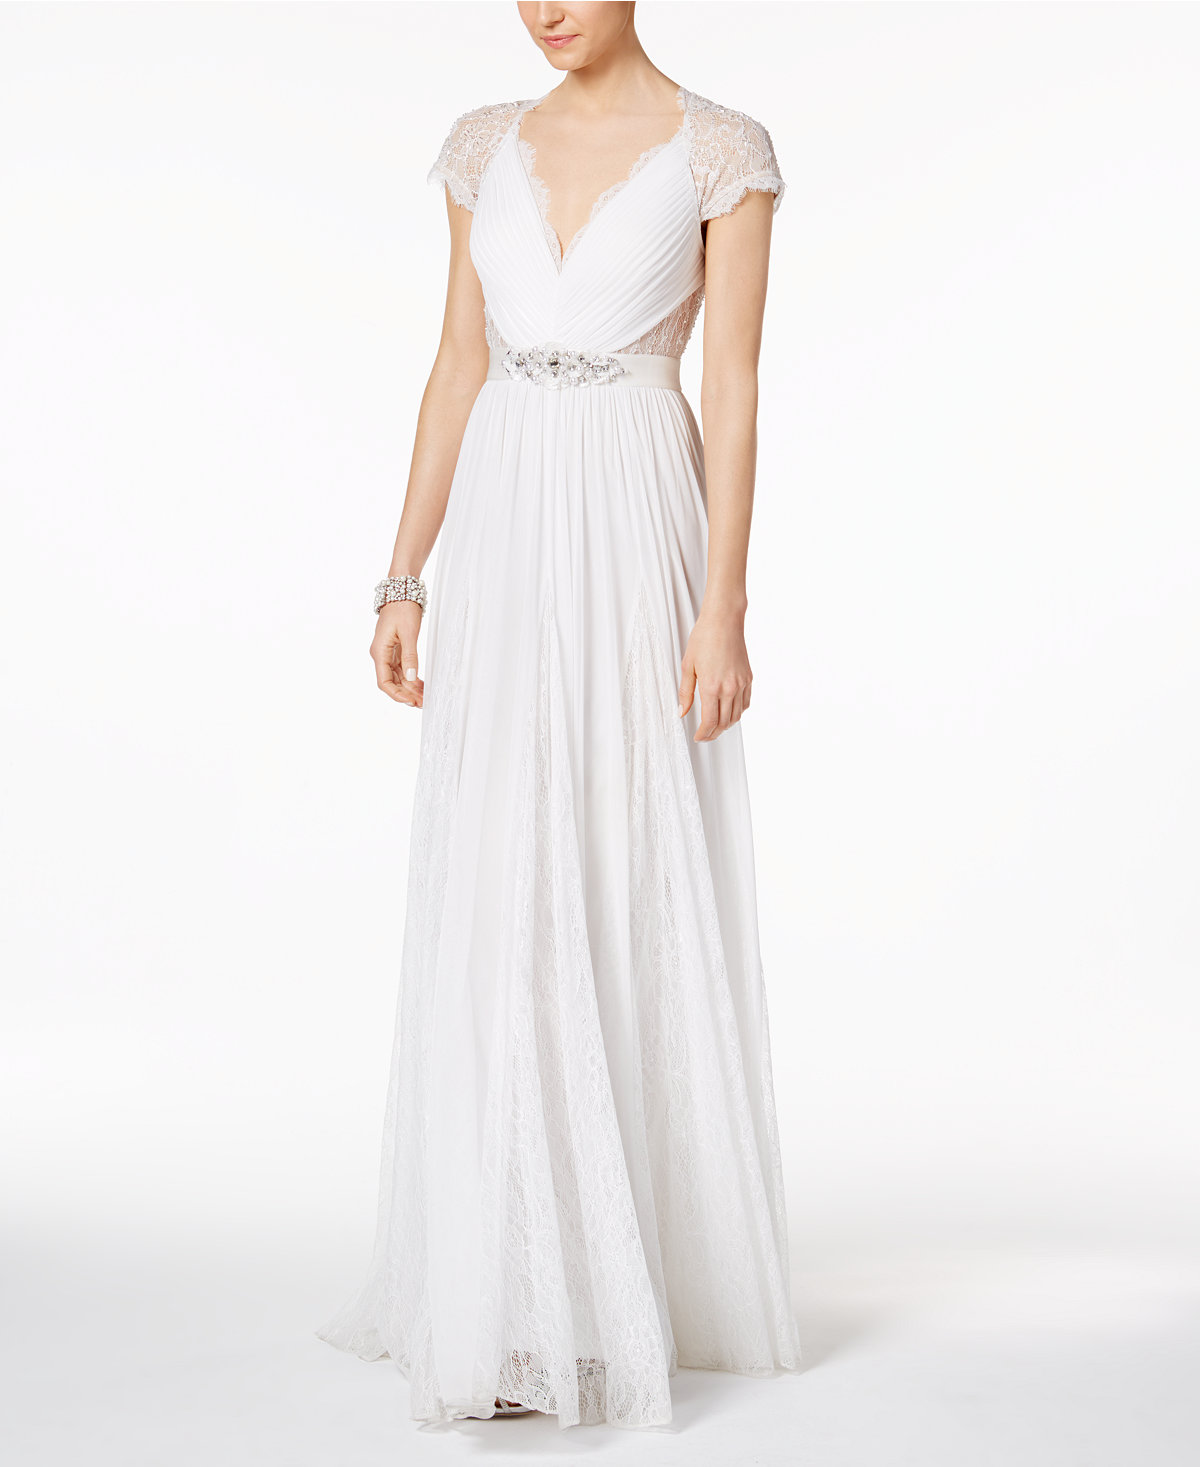 Adrianna Papell Illusion Embellished A-Line Gown | 20 Wedding Dresses Under $1000 | BridalGush.com